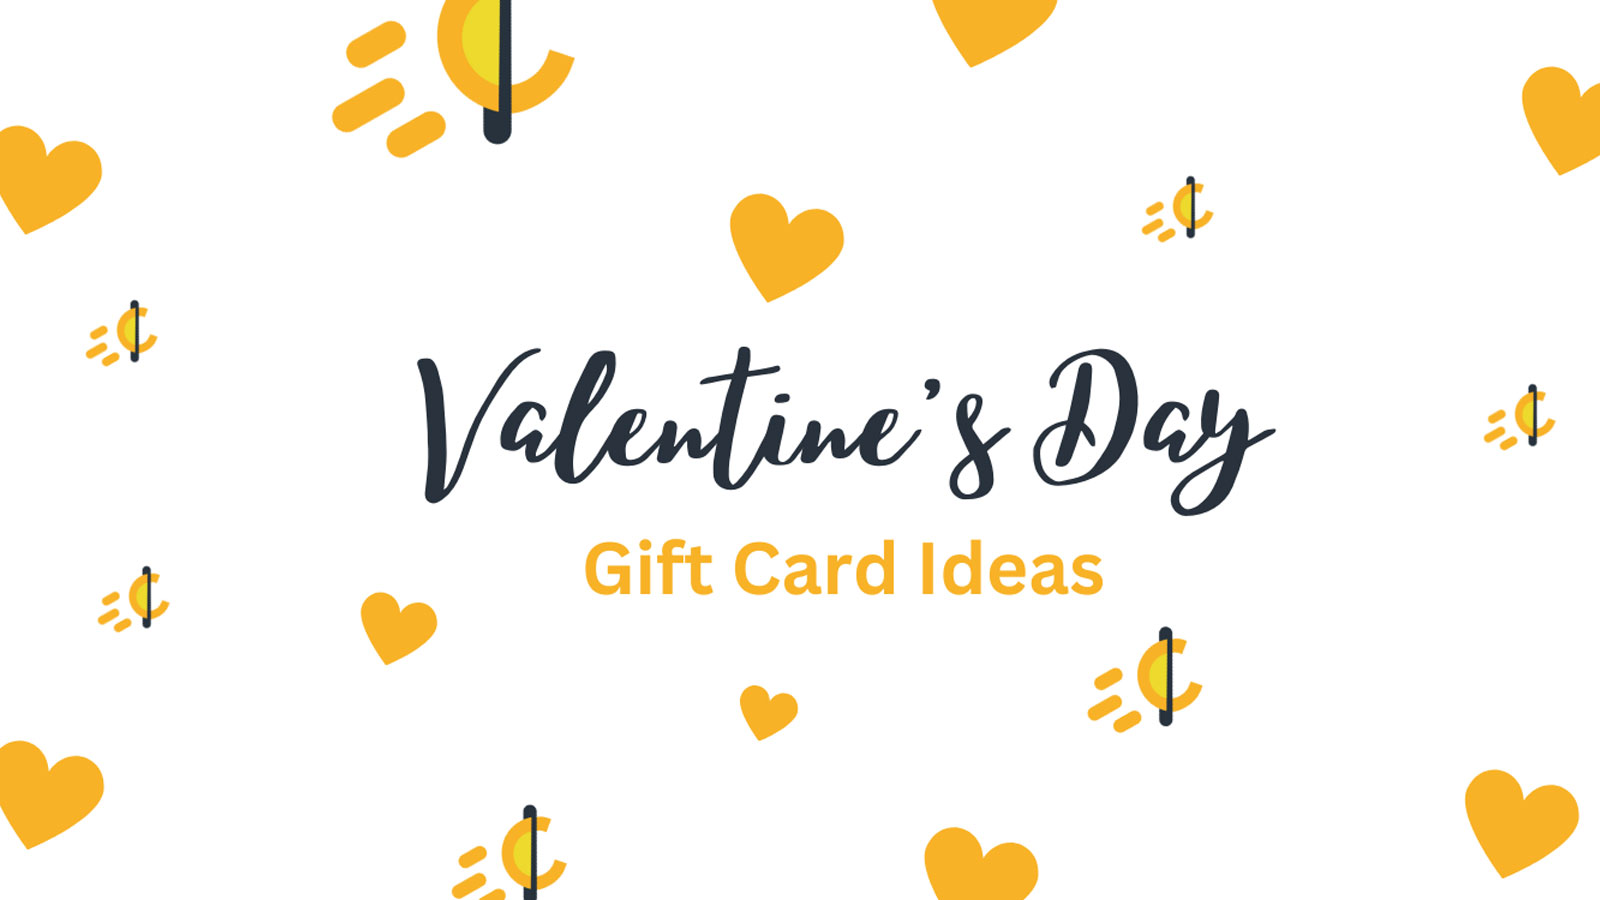 valentines-day-gift-card-ideas-cryptorefills